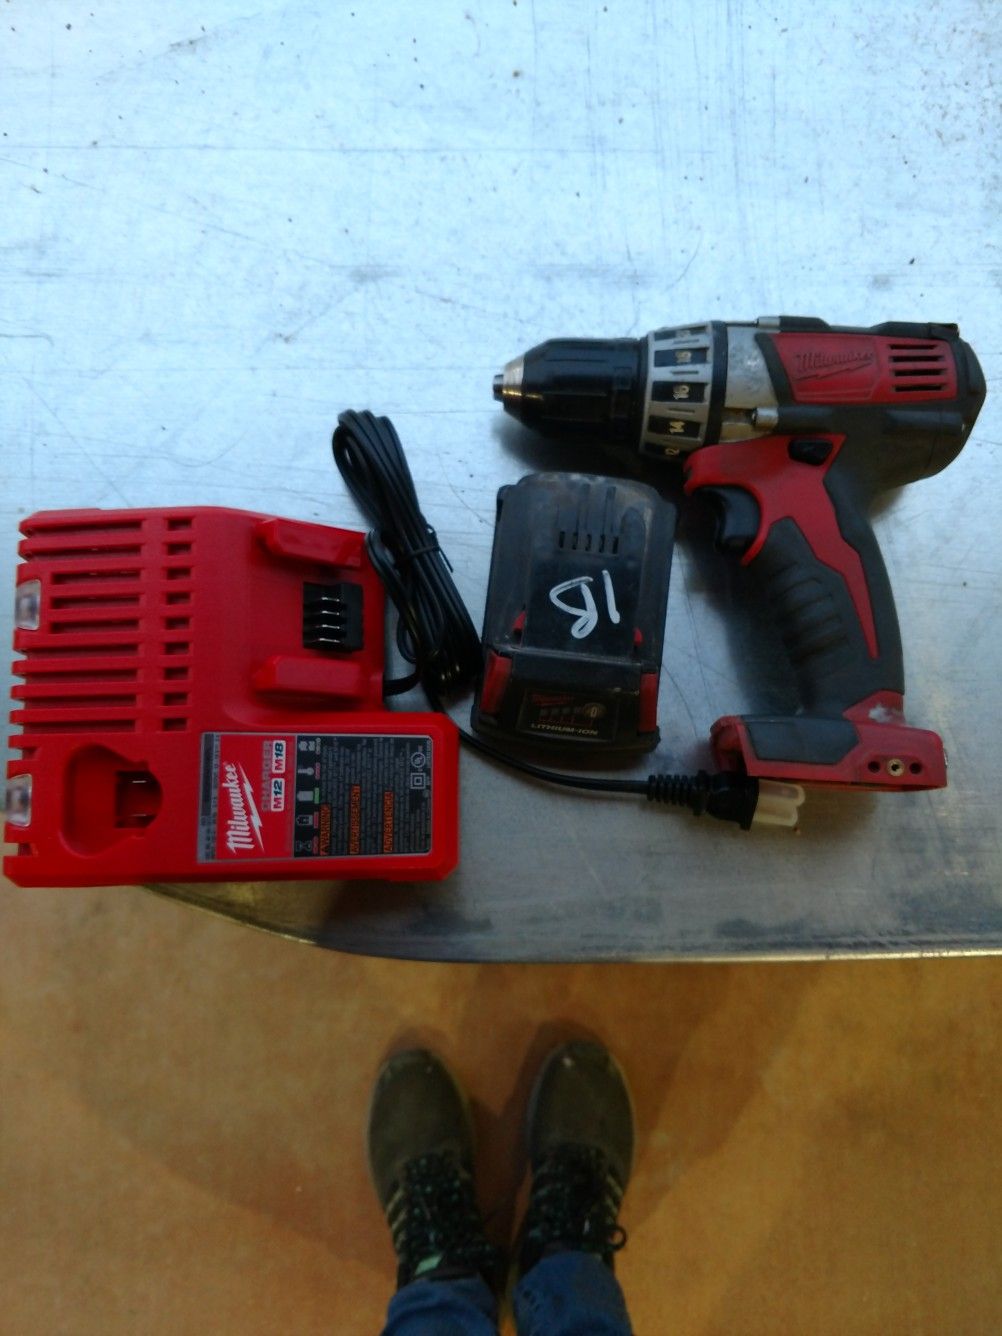 Milwaukee 1/2" drill/driver with battery & new charger